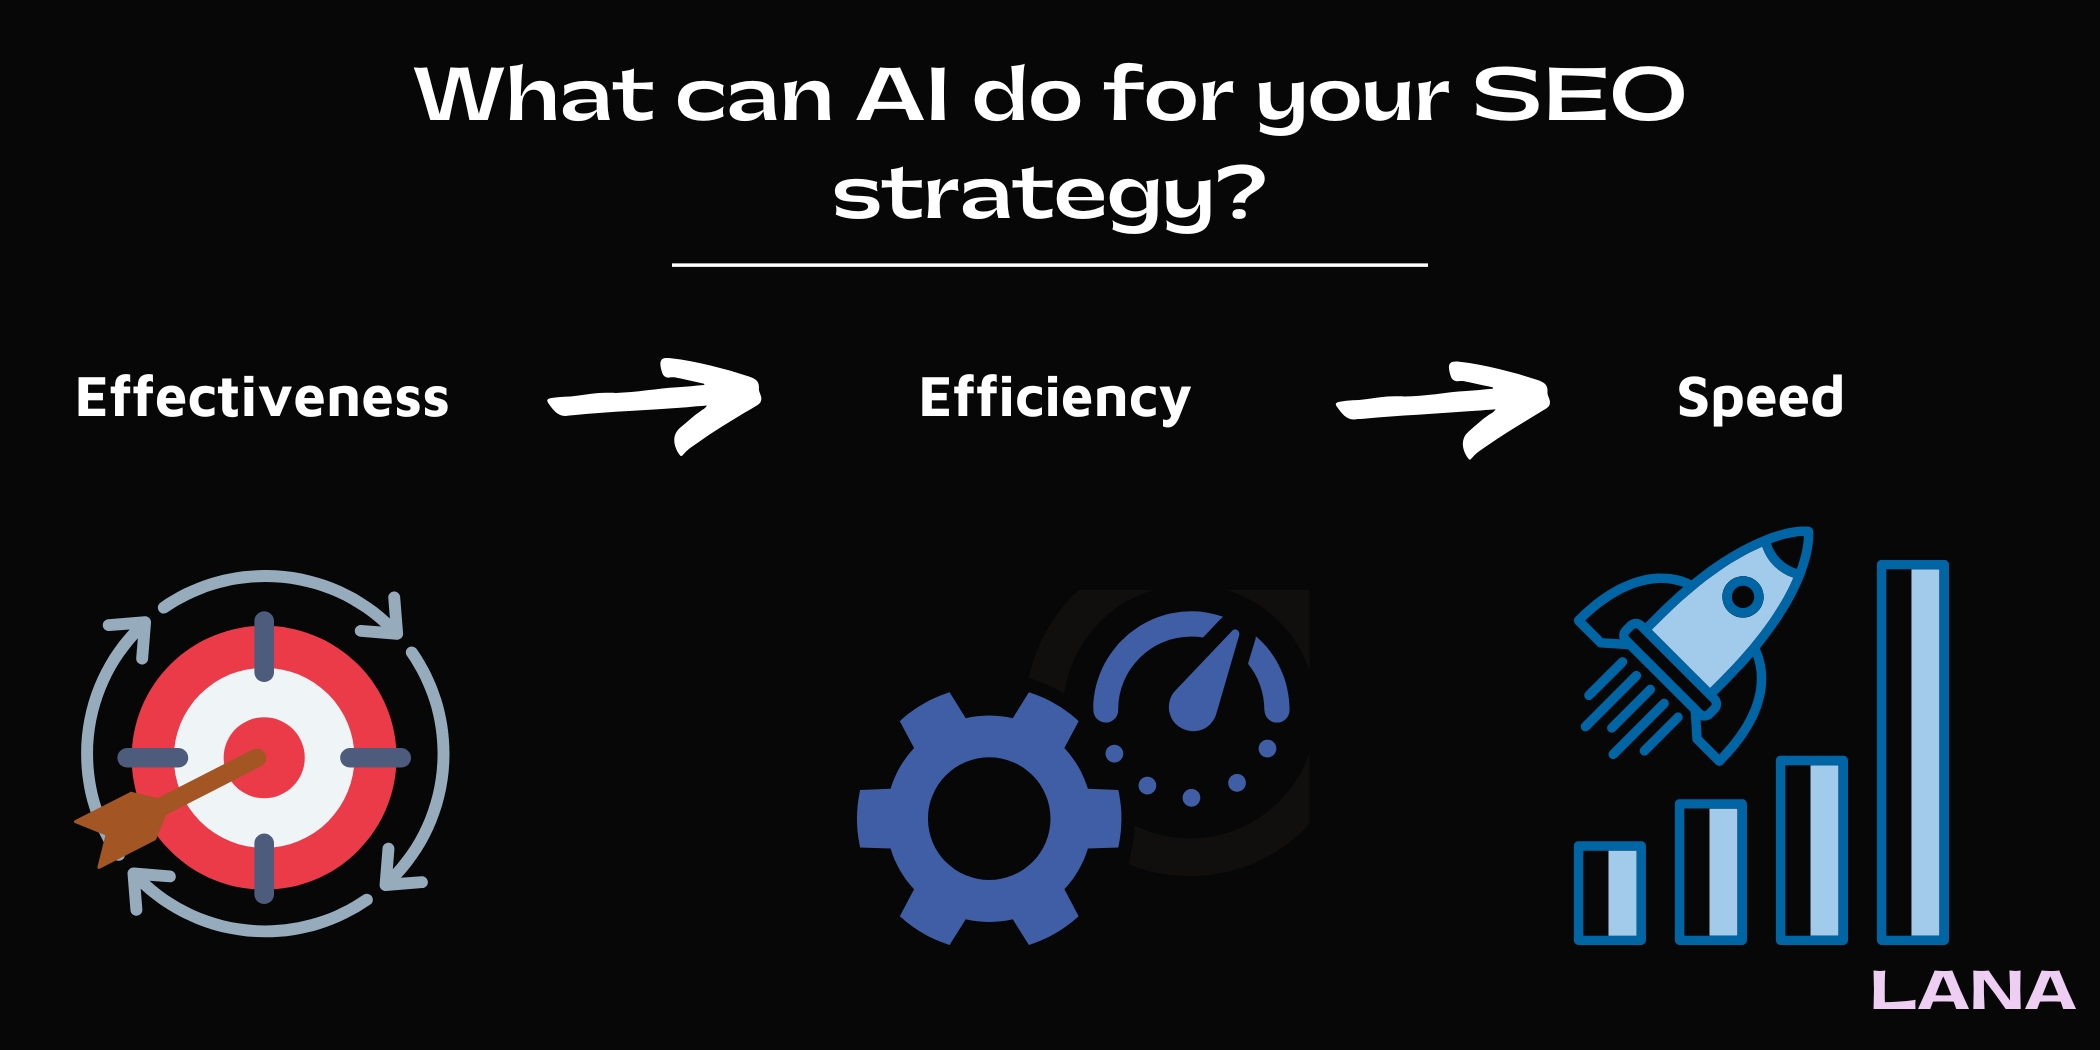 what can ai do for your seo strategy? Effectiveness, Efficiency, and Speed